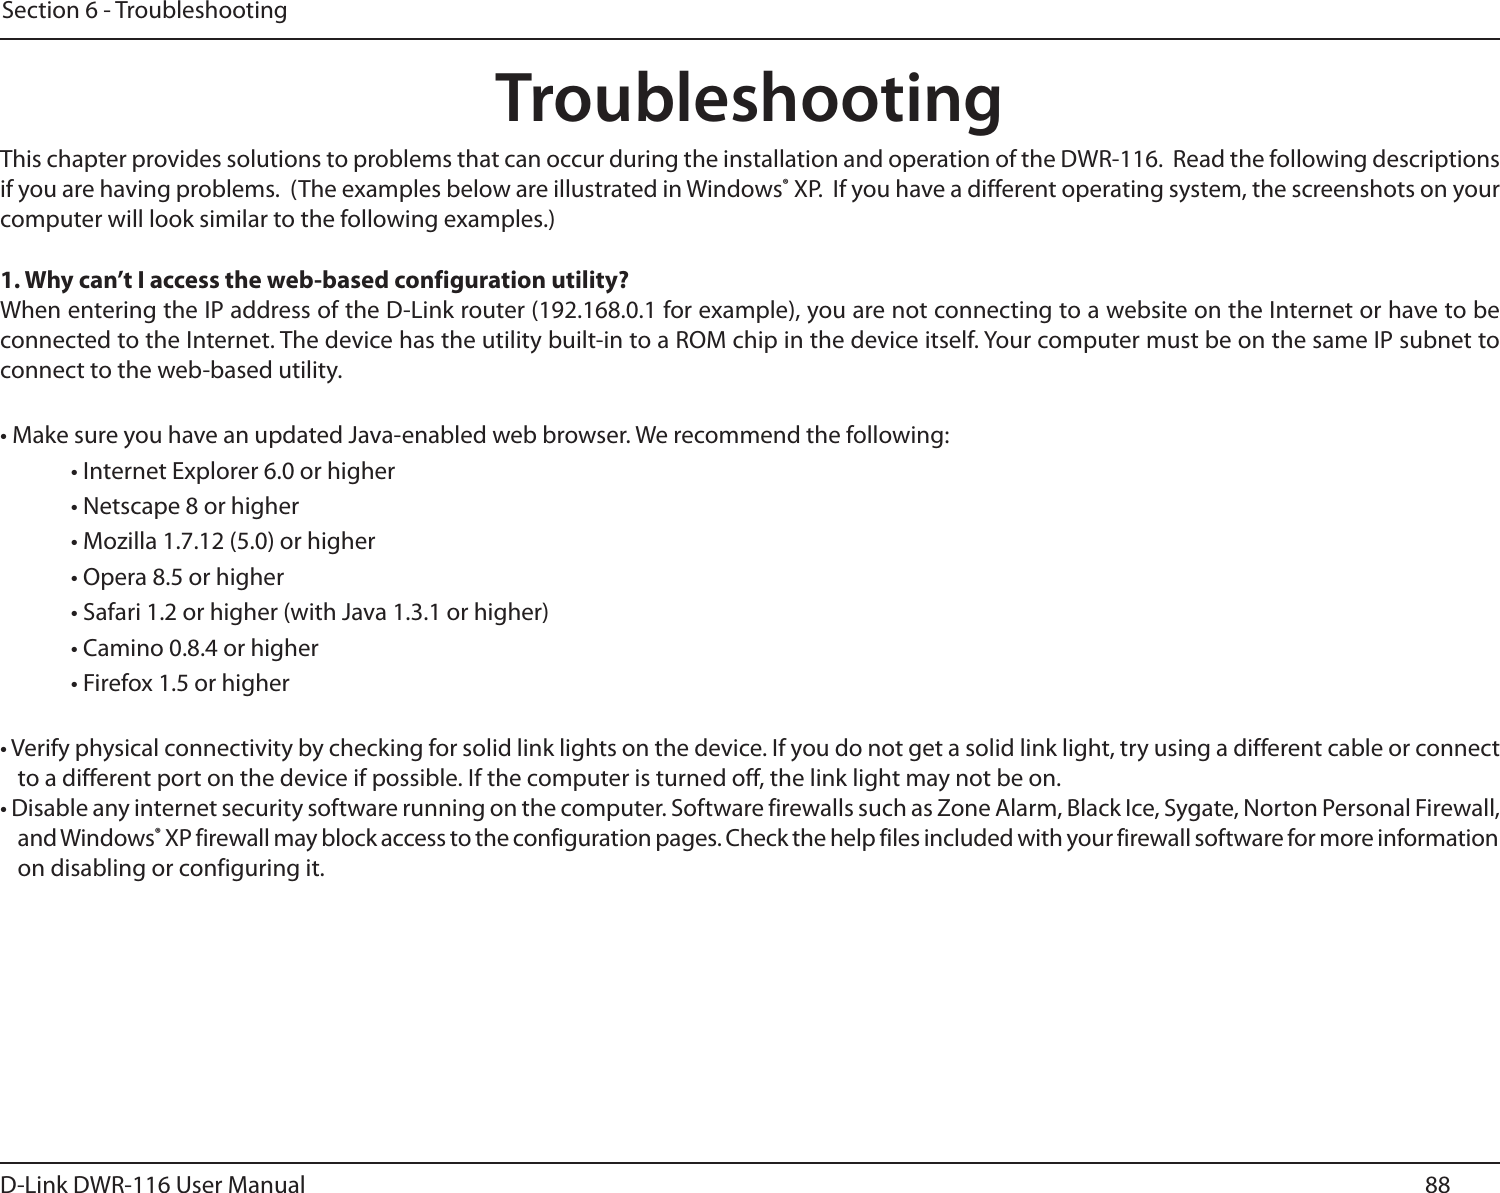 88D-Link DWR-116 User ManualSection 6 - TroubleshootingTroubleshootingThis chapter provides solutions to problems that can occur during the installation and operation of the DWR-116.  Read the following descriptions if you are having problems.  (The examples below are illustrated in Windows® XP.  If you have a different operating system, the screenshots on your computer will look similar to the following examples.)1. Why can’t I access the web-based configuration utility?When entering the IP address of the D-Link router (192.168.0.1 for example), you are not connecting to a website on the Internet or have to be connected to the Internet. The device has the utility built-in to a ROM chip in the device itself. Your computer must be on the same IP subnet to connect to the web-based utility. • Make sure you have an updated Java-enabled web browser. We recommend the following: • Internet Explorer 6.0 or higher • Netscape 8 or higher • Mozilla 1.7.12 (5.0) or higher • Opera 8.5 or higher • Safari 1.2 or higher (with Java 1.3.1 or higher) • Camino 0.8.4 or higher • Firefox 1.5 or higher • Verify physical connectivity by checking for solid link lights on the device. If you do not get a solid link light, try using a different cable or connect to a different port on the device if possible. If the computer is turned off, the link light may not be on.• Disable any internet security software running on the computer. Software firewalls such as Zone Alarm, Black Ice, Sygate, Norton Personal Firewall, and Windows® XP firewall may block access to the configuration pages. Check the help files included with your firewall software for more information on disabling or configuring it.